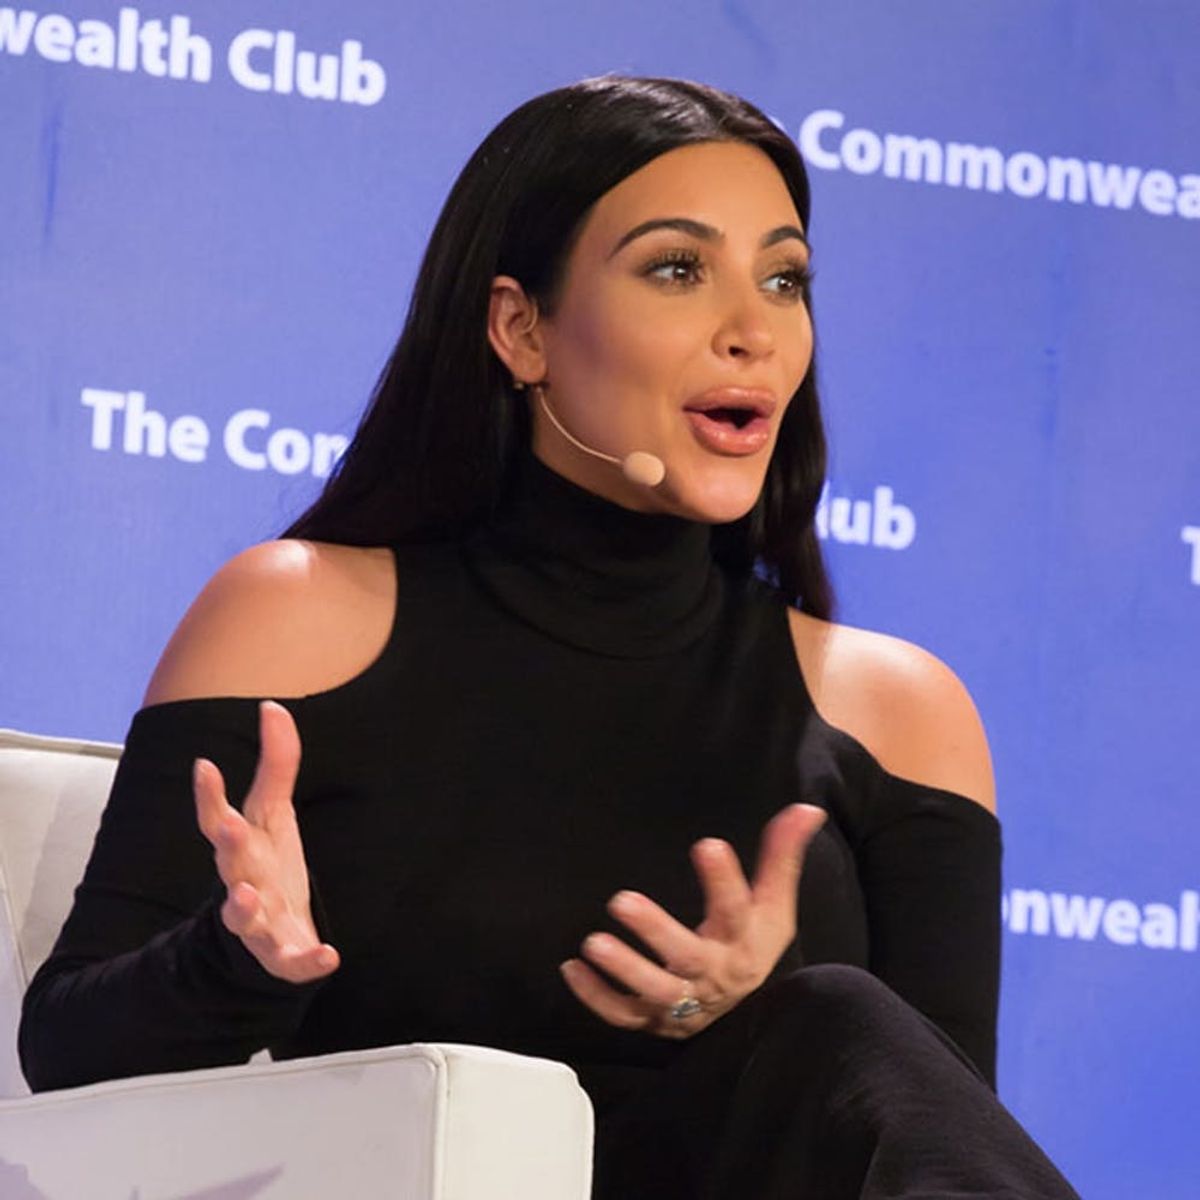 10 Things Kim Kardashian Told Us About Hillary Clinton, Women in the Media + More